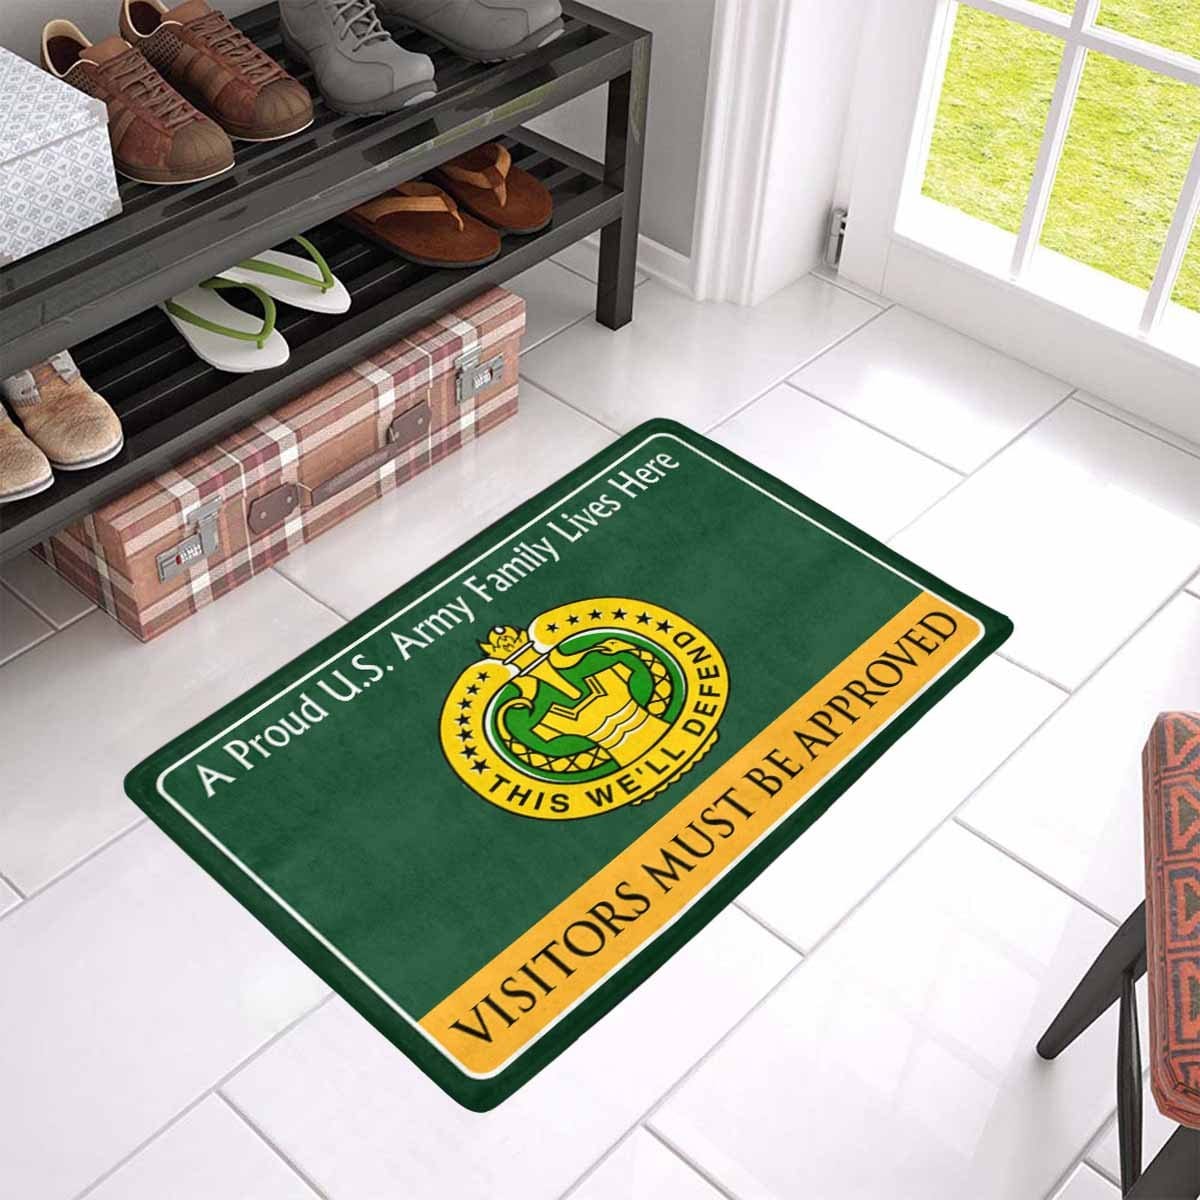 US Army Drill Sergeant Family Doormat - Visitors must be approved Doormat (23.6 inches x 15.7 inches)-Doormat-Army-Branch-Veterans Nation